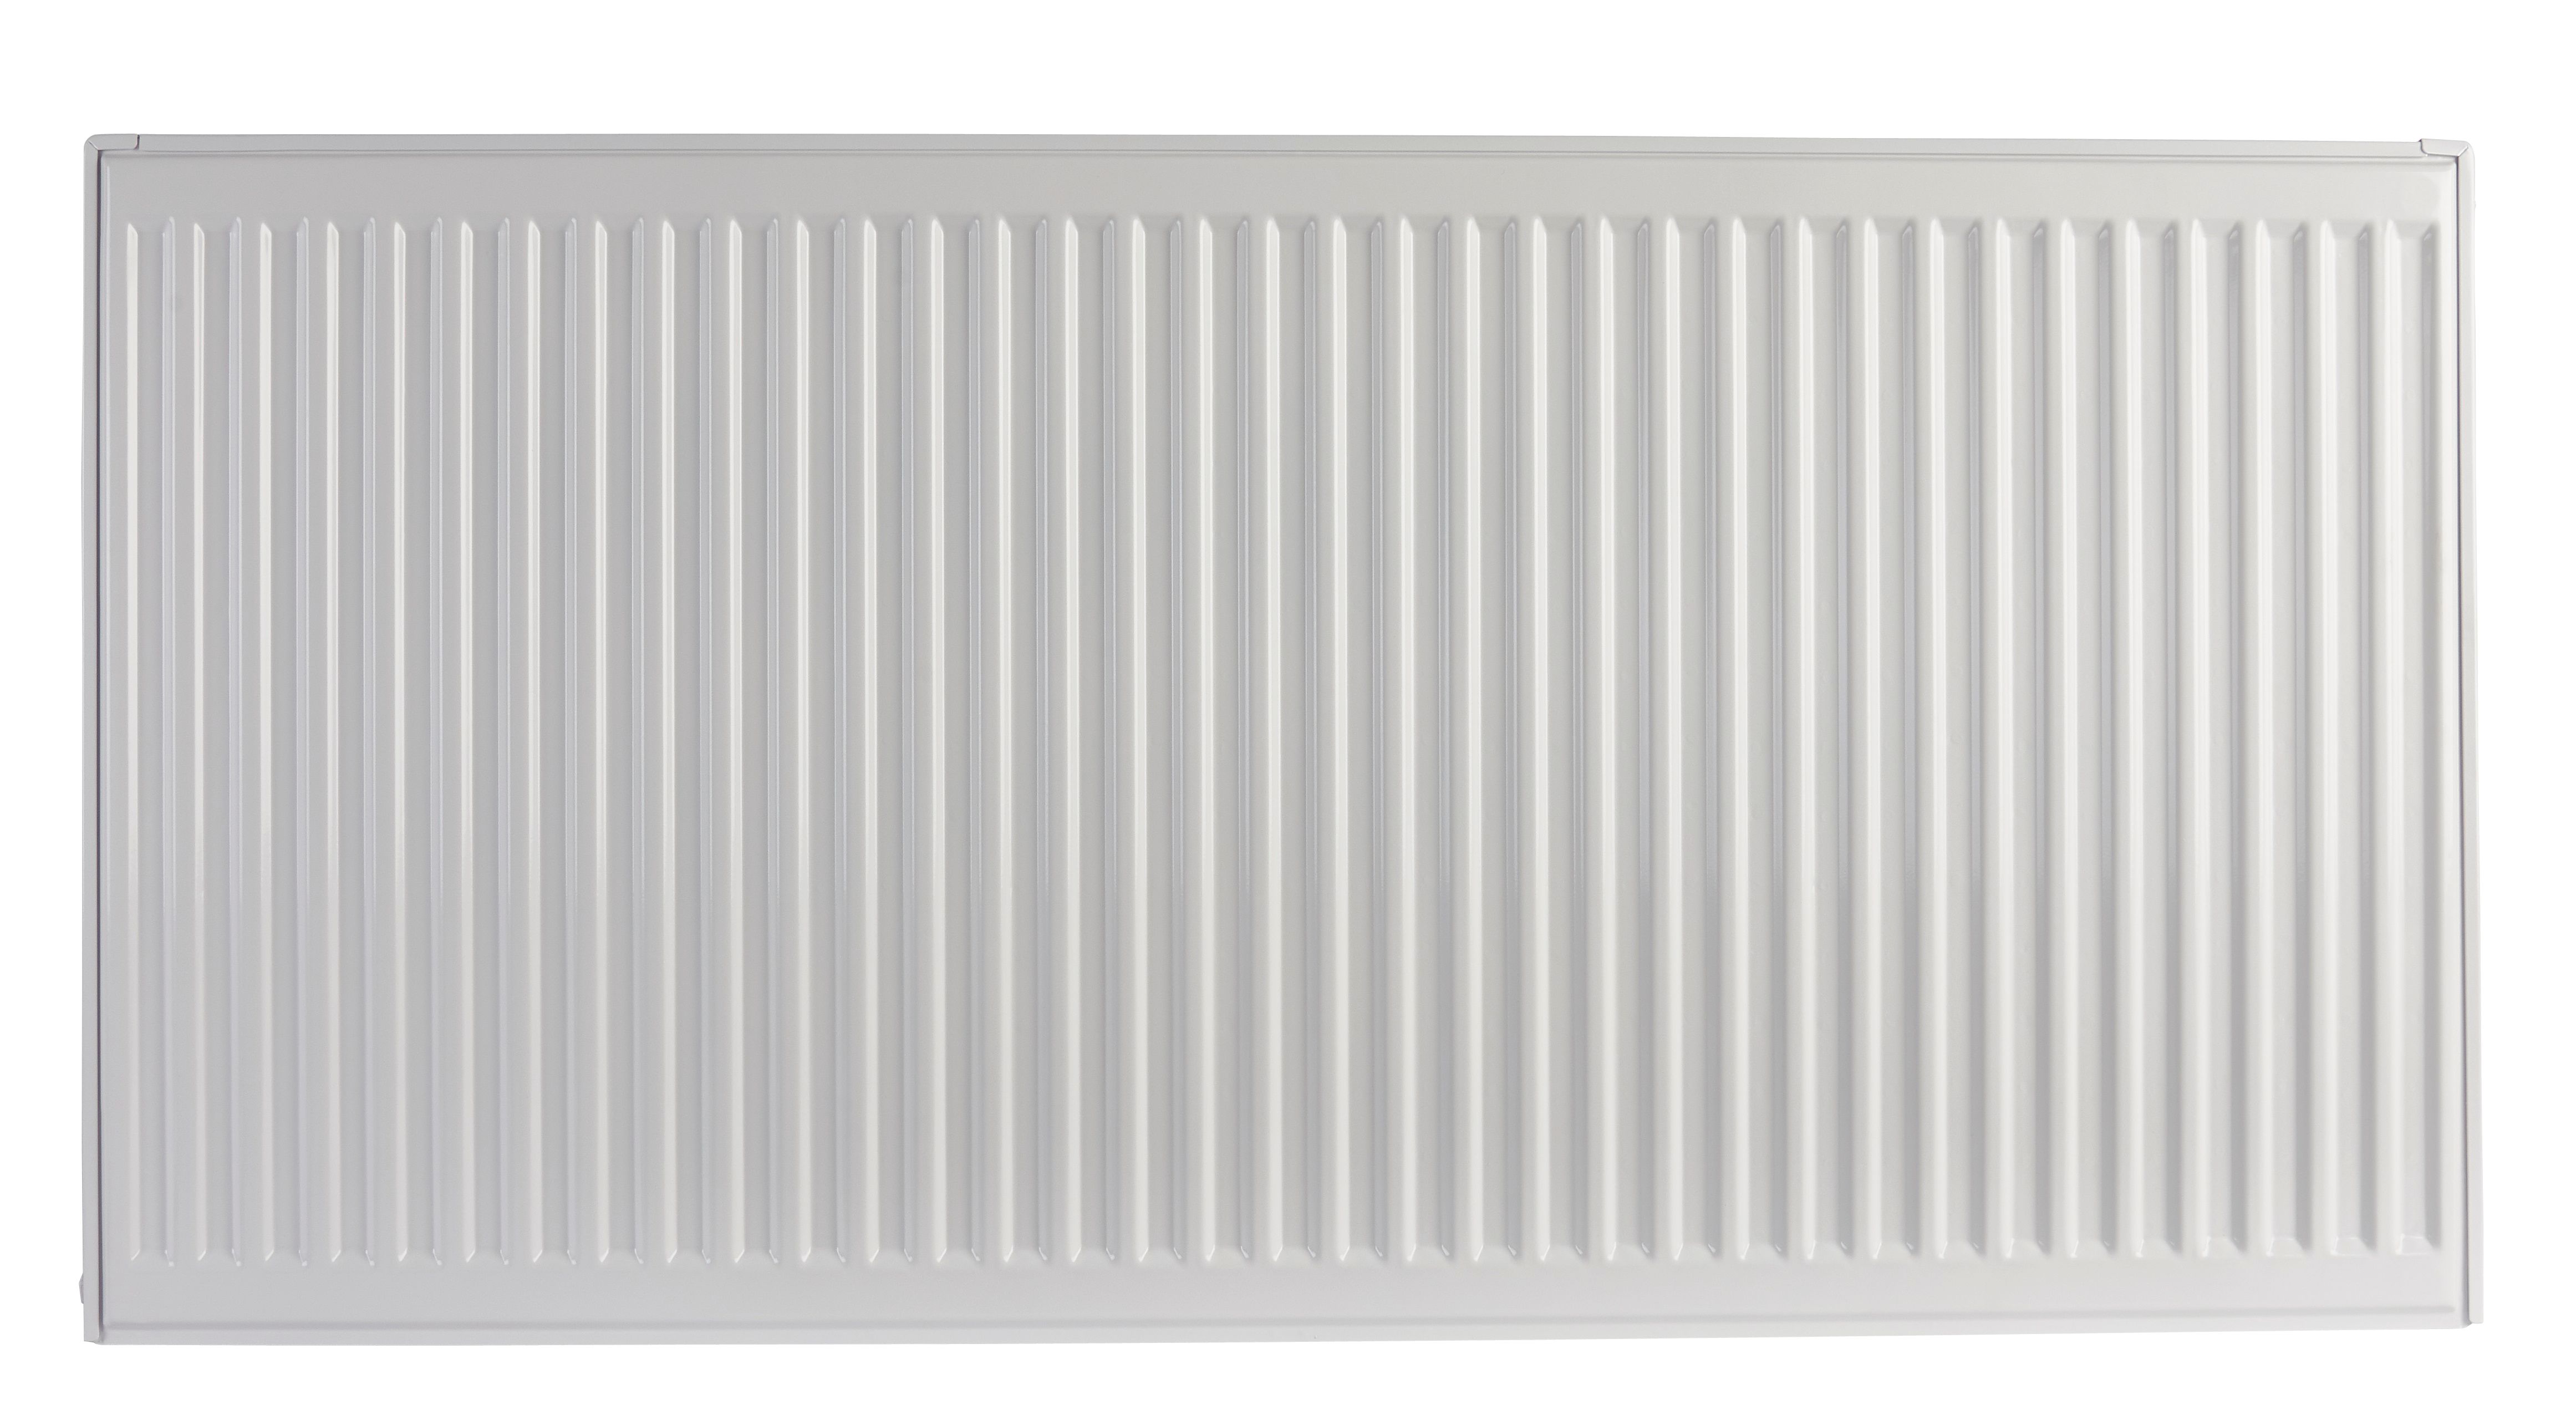 Image of Homeline by Stelrad 500 x 1100mm Type 11 Single Panel Single Convector Radiator